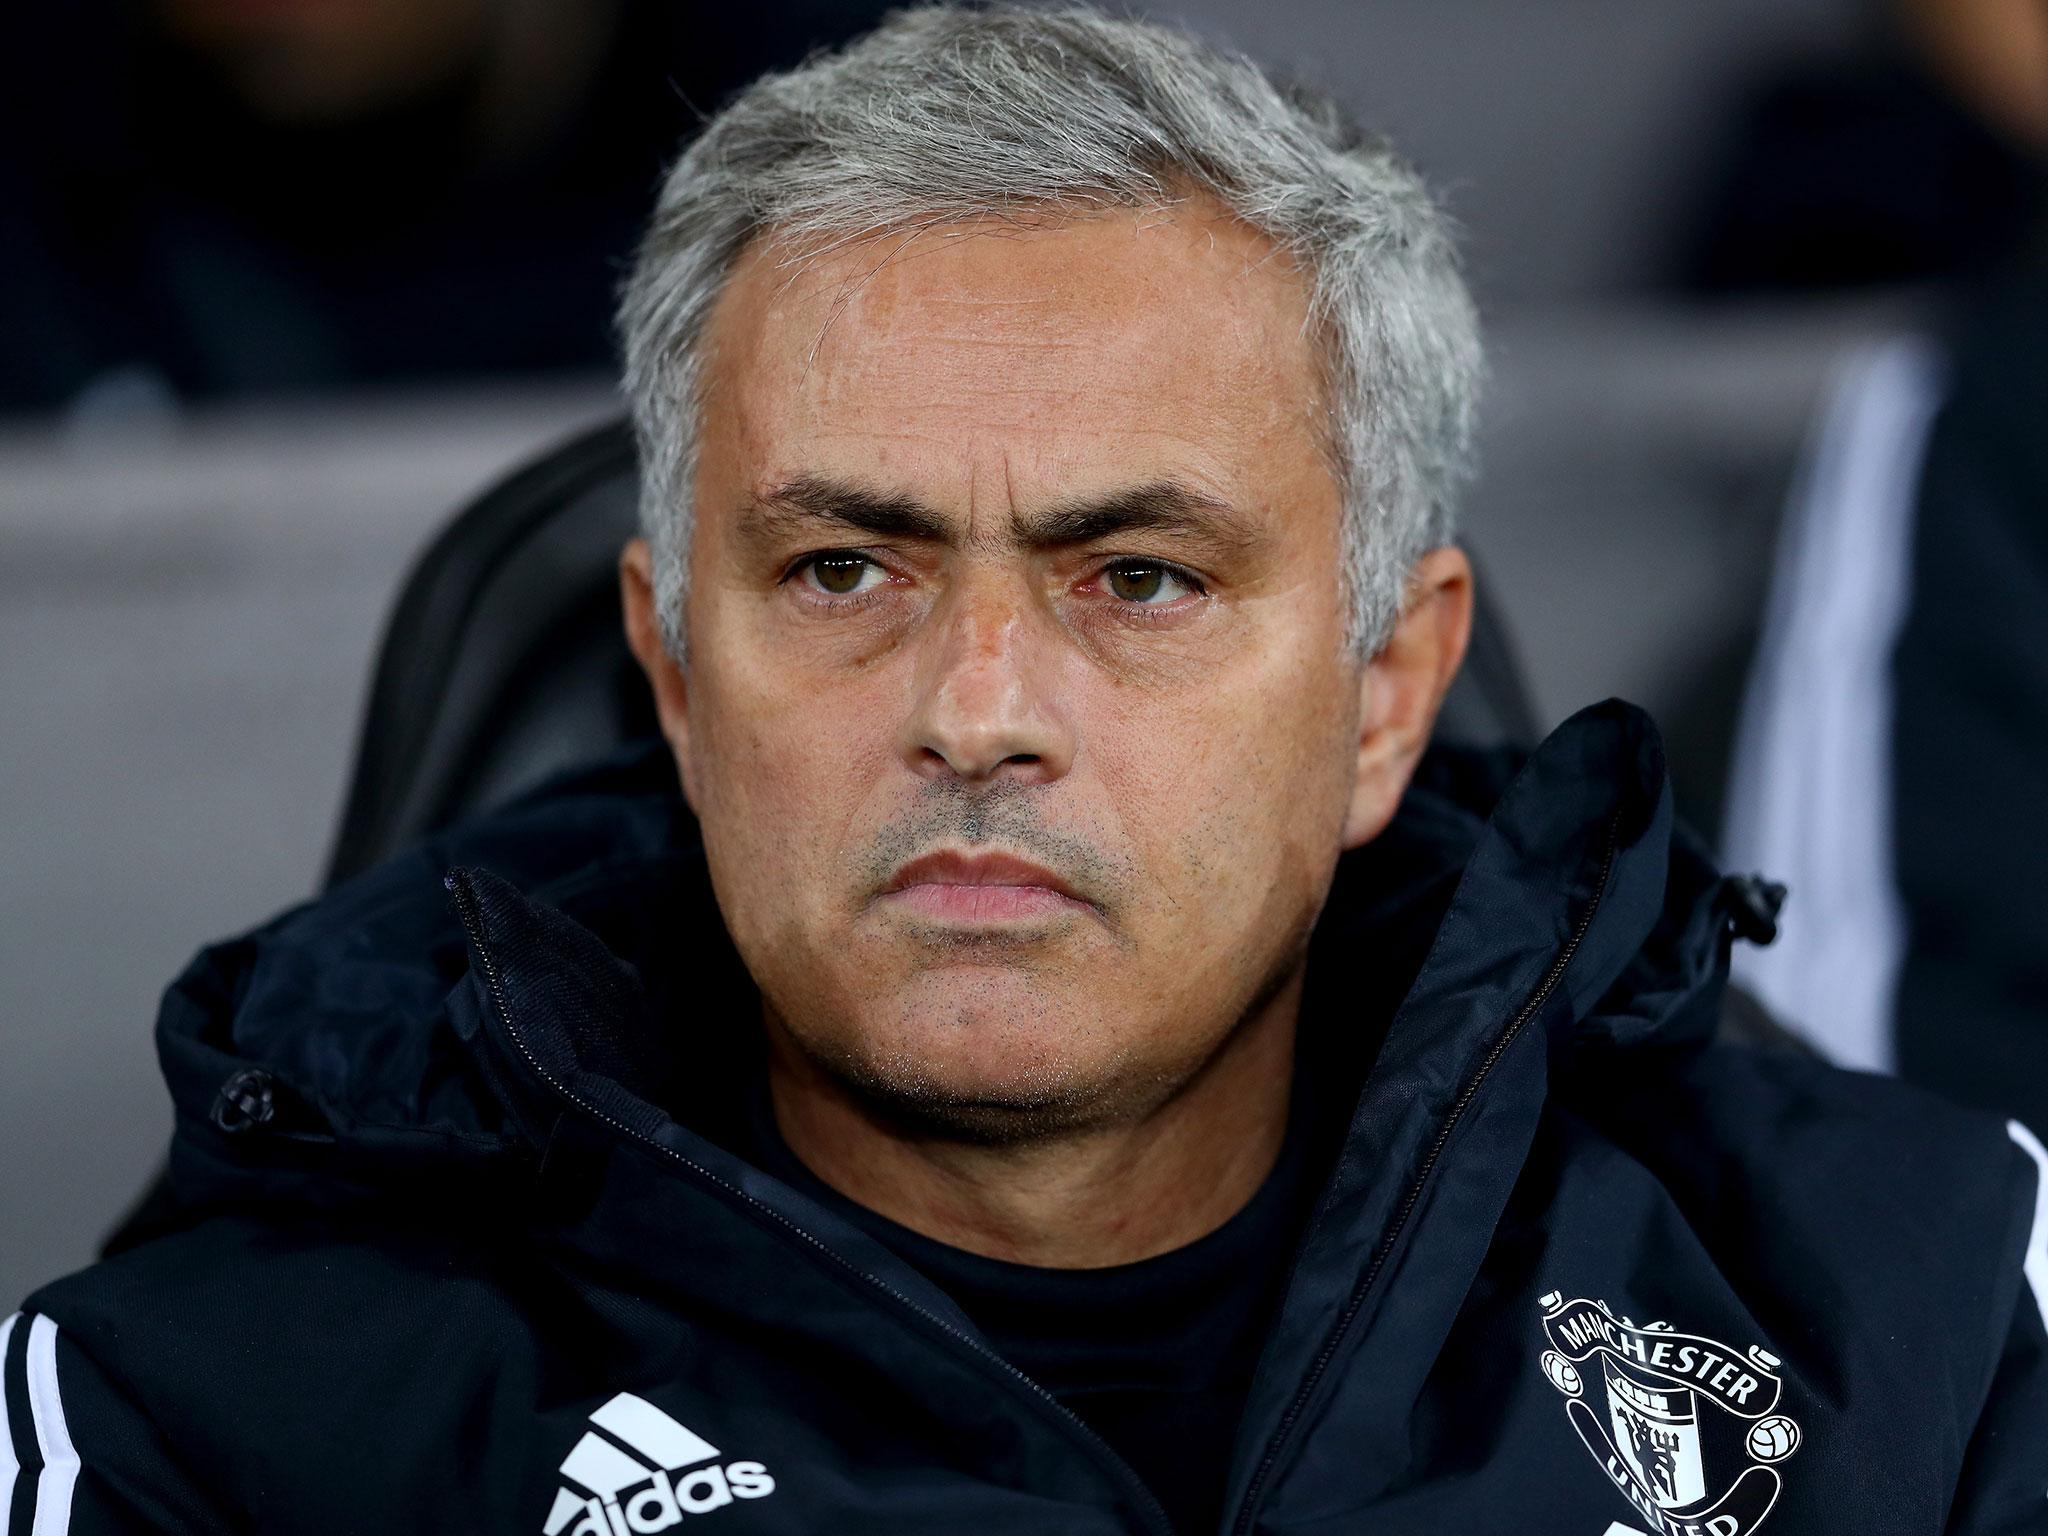 Jose Mourinho was pleased with his side's performance on Tuesday night